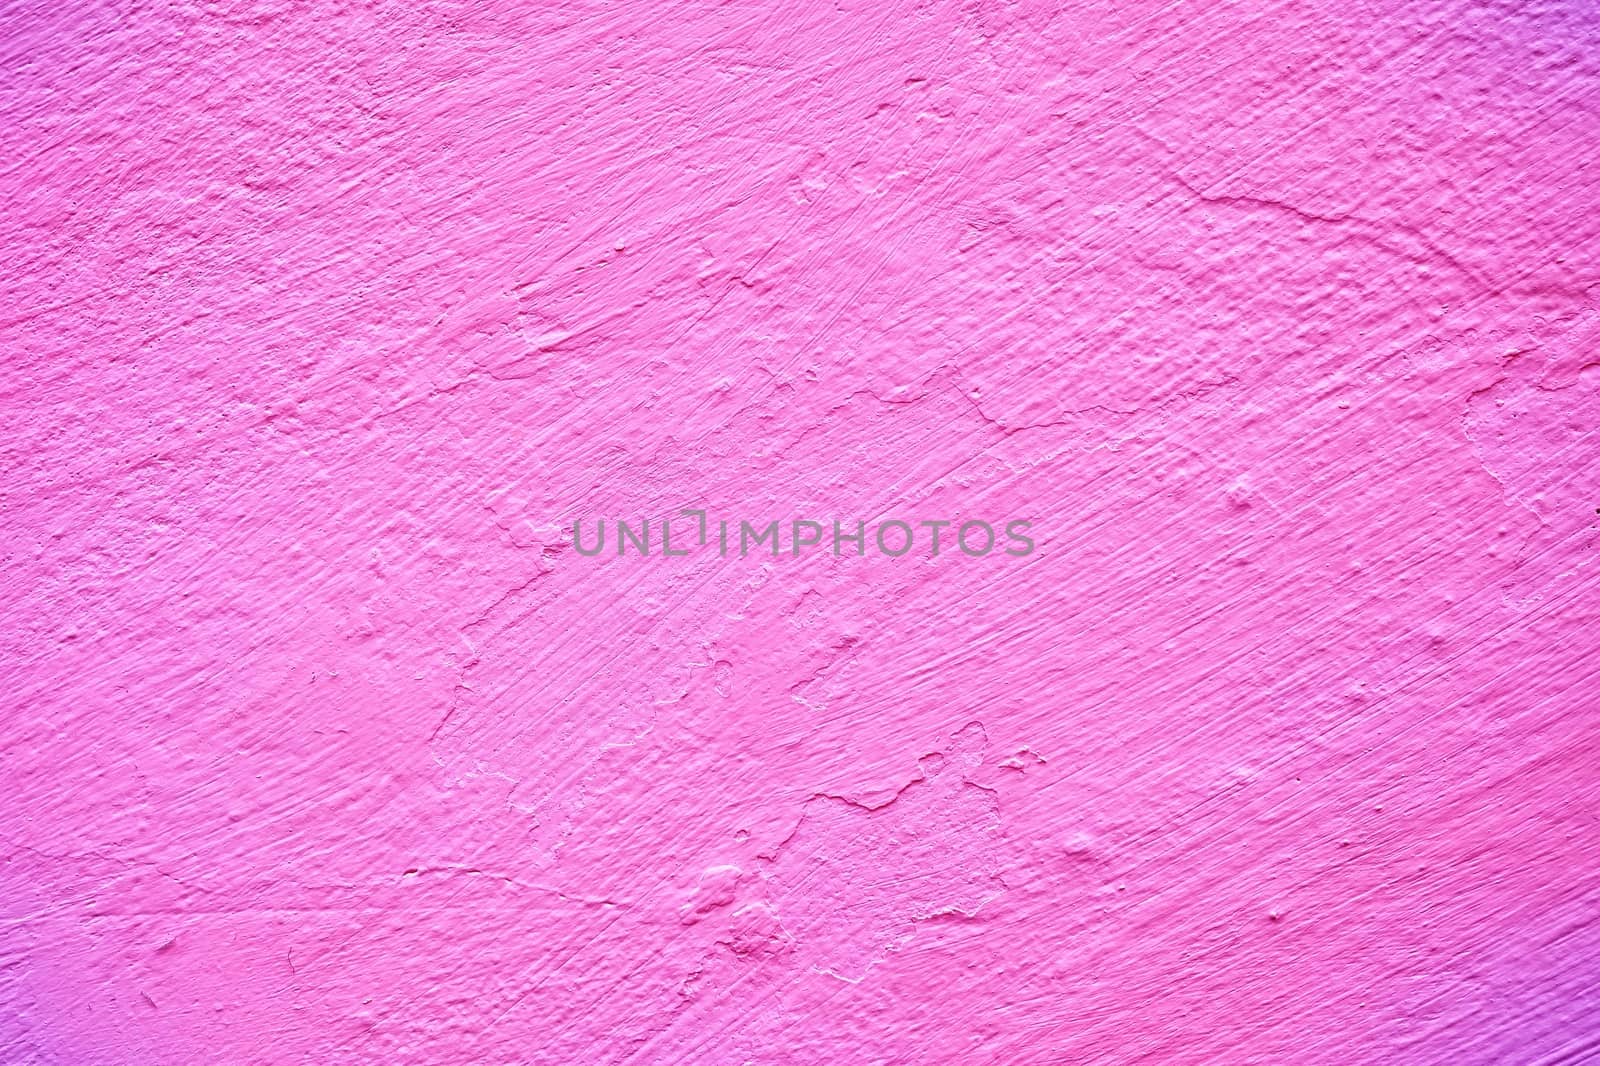 Pink Painting on Concrete Background.